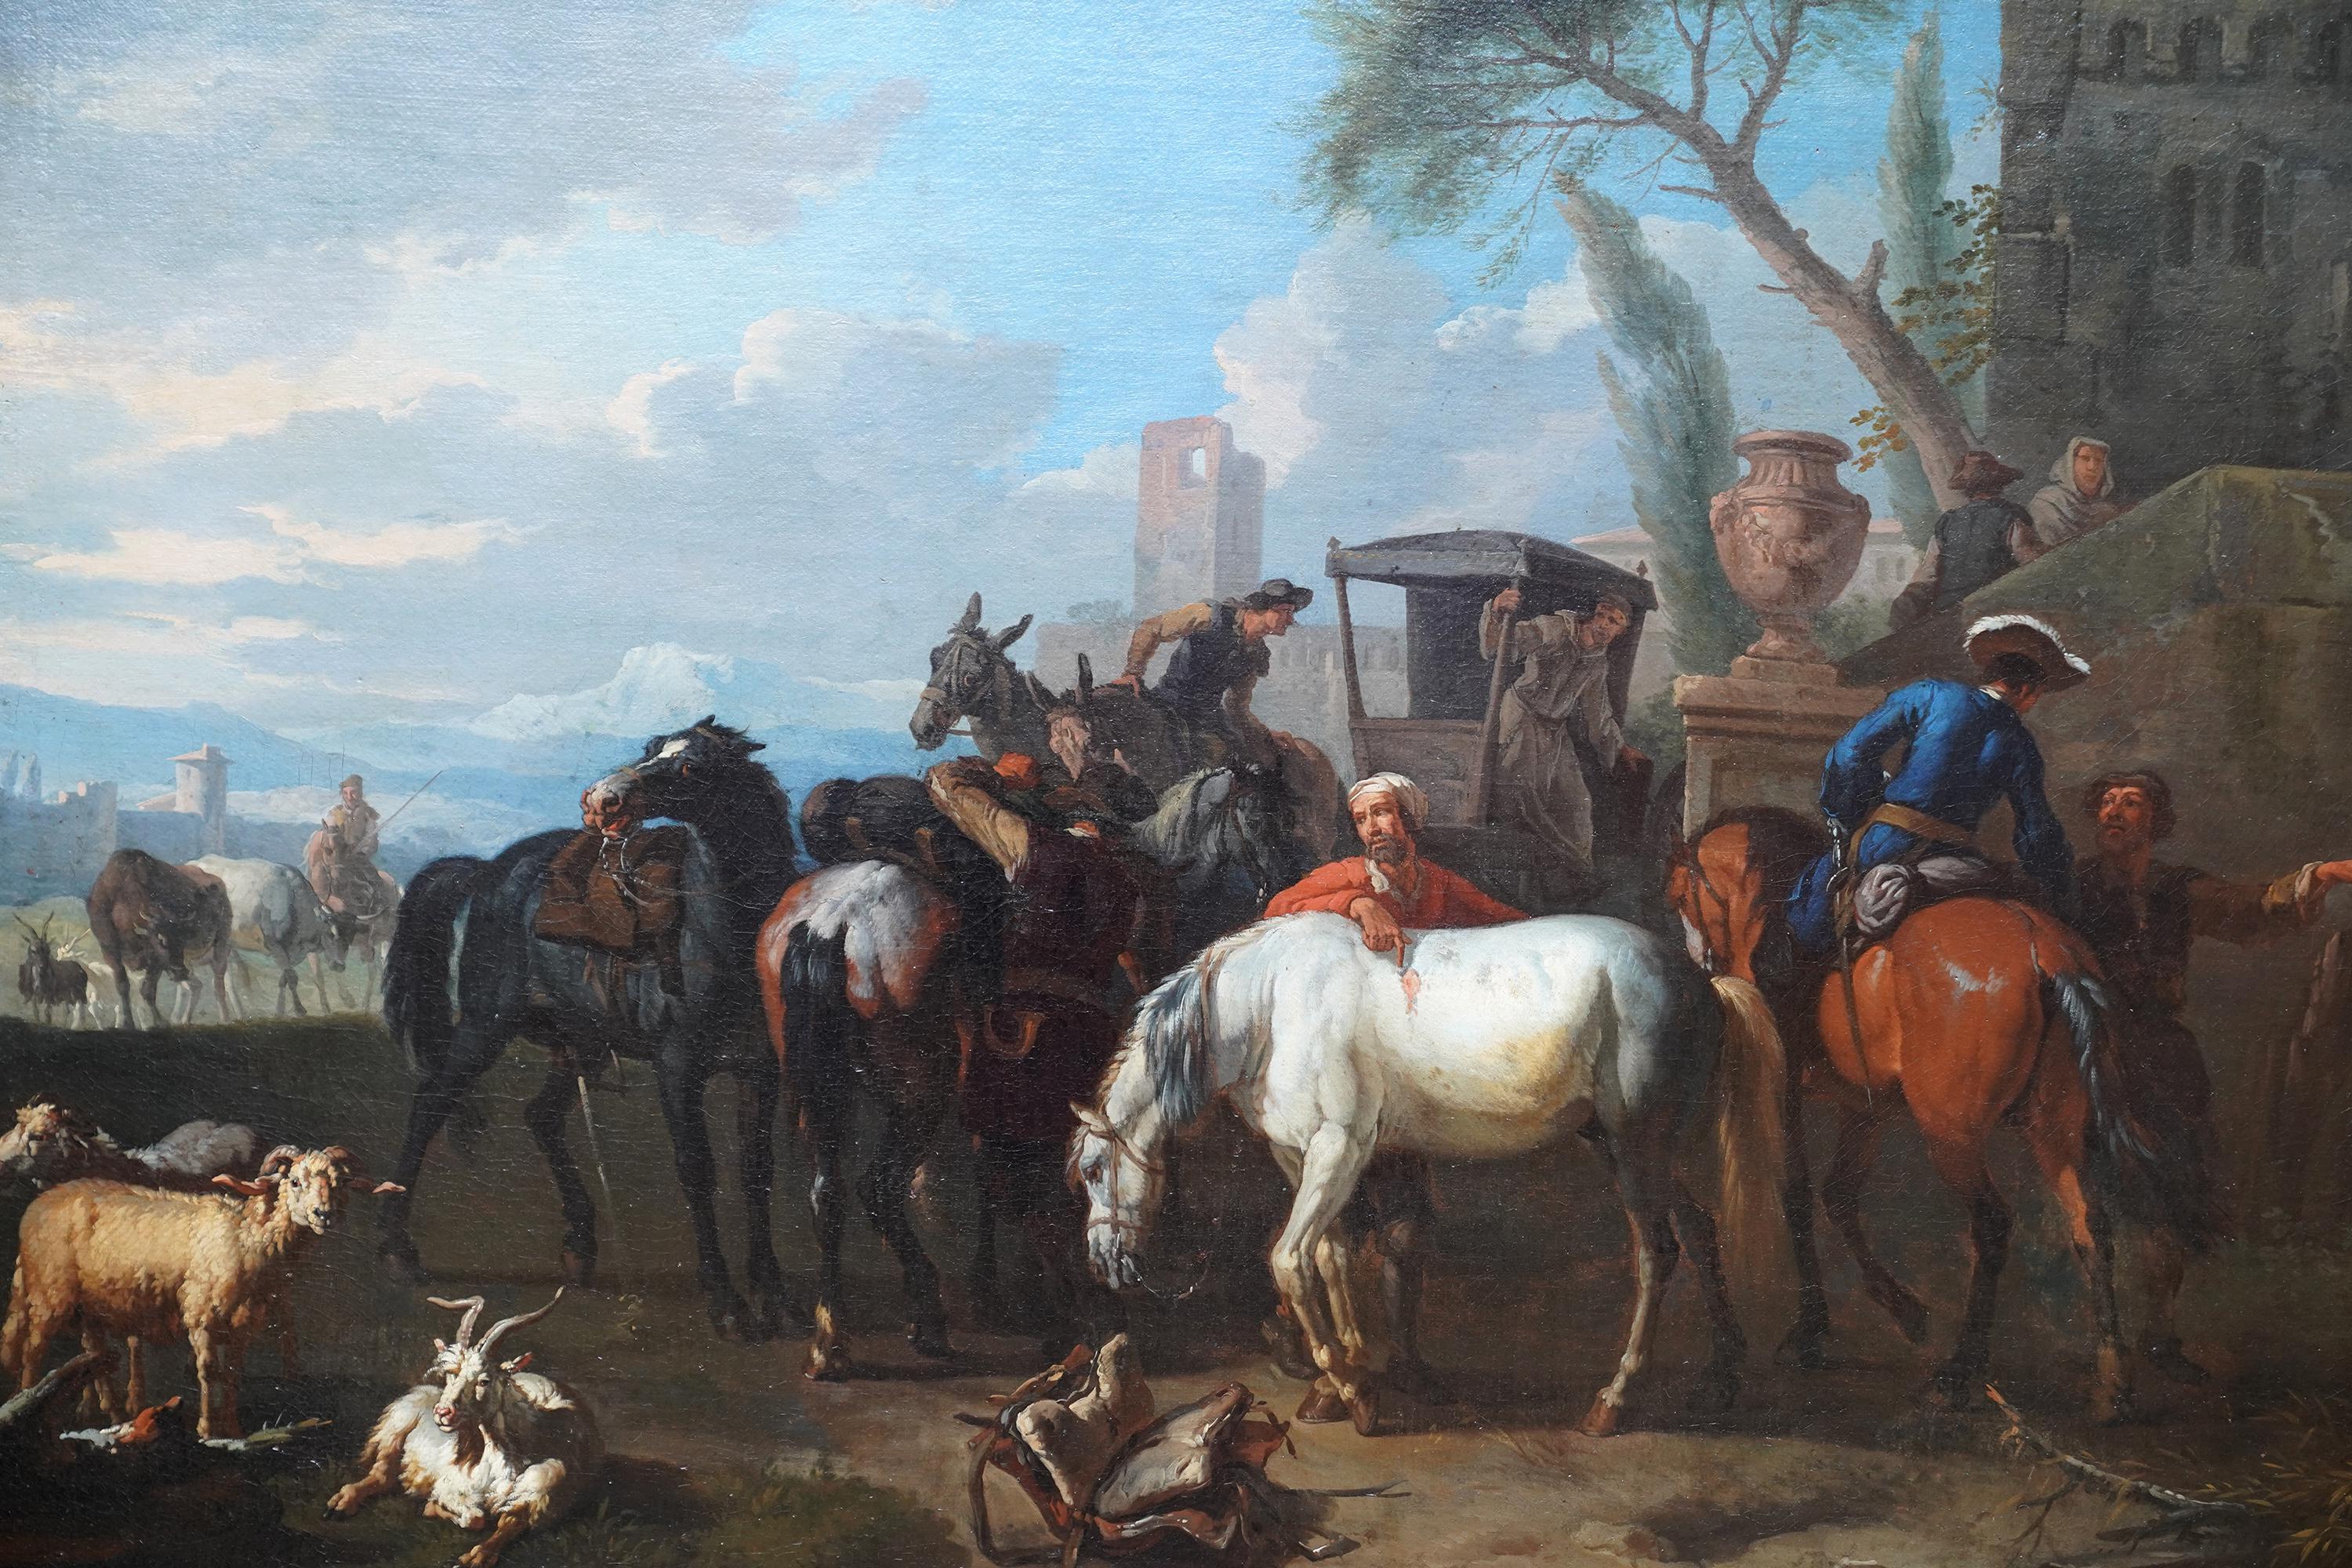 Travellers and Carriage in Landscape Dutch 17th century  Golden Age oil painting - Old Masters Painting by Pieter Bodding Van Laer